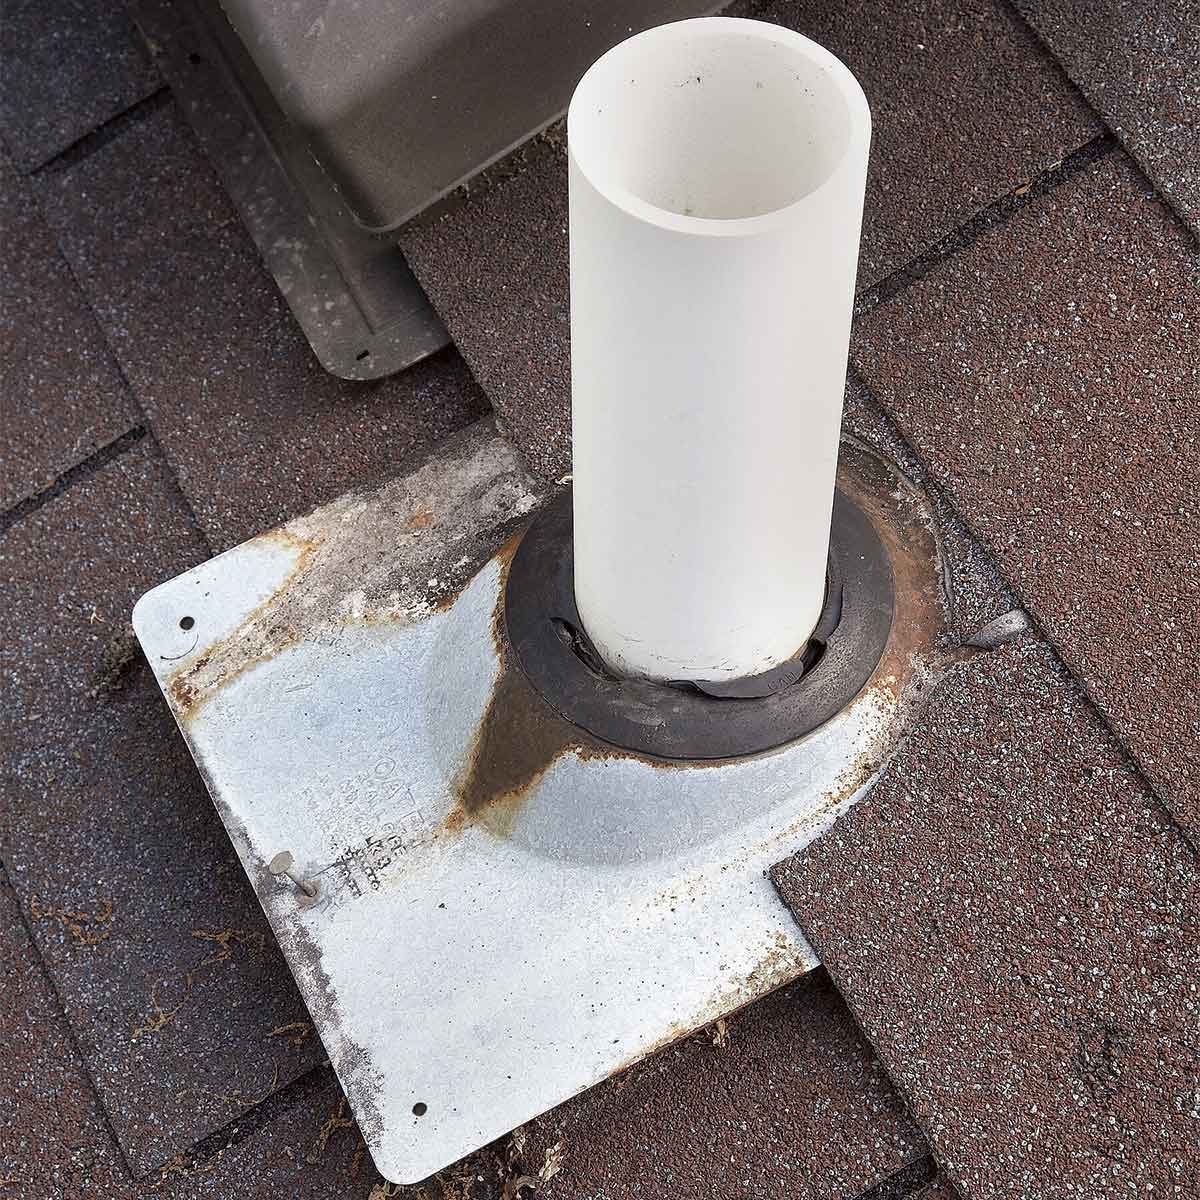 15 Silent Signs That Your Roof Is Failing The Family Handyman